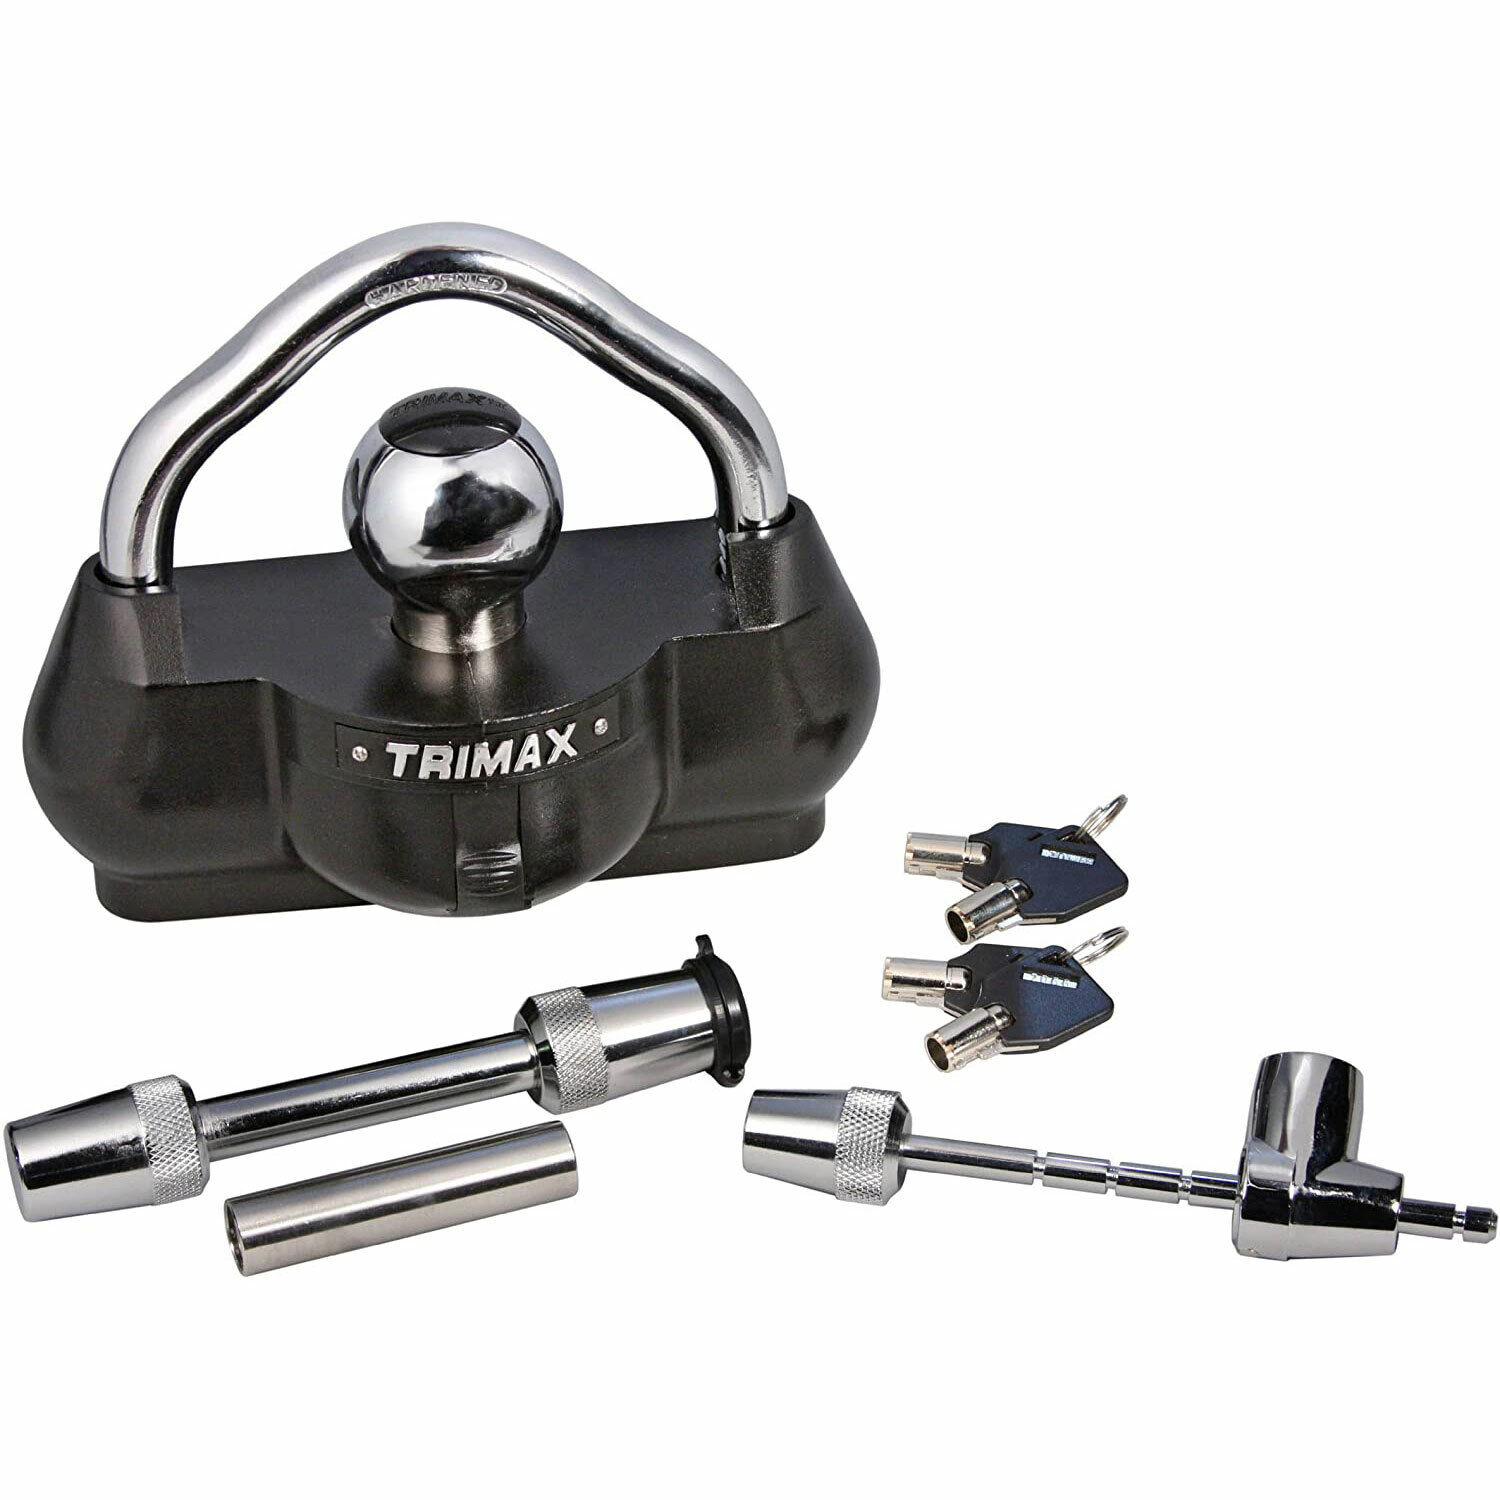 Trimax TCP100 All Keyed Alike Towing Kit Open Set SALE 89%OFF with Pack Box Carrying Case 見事な